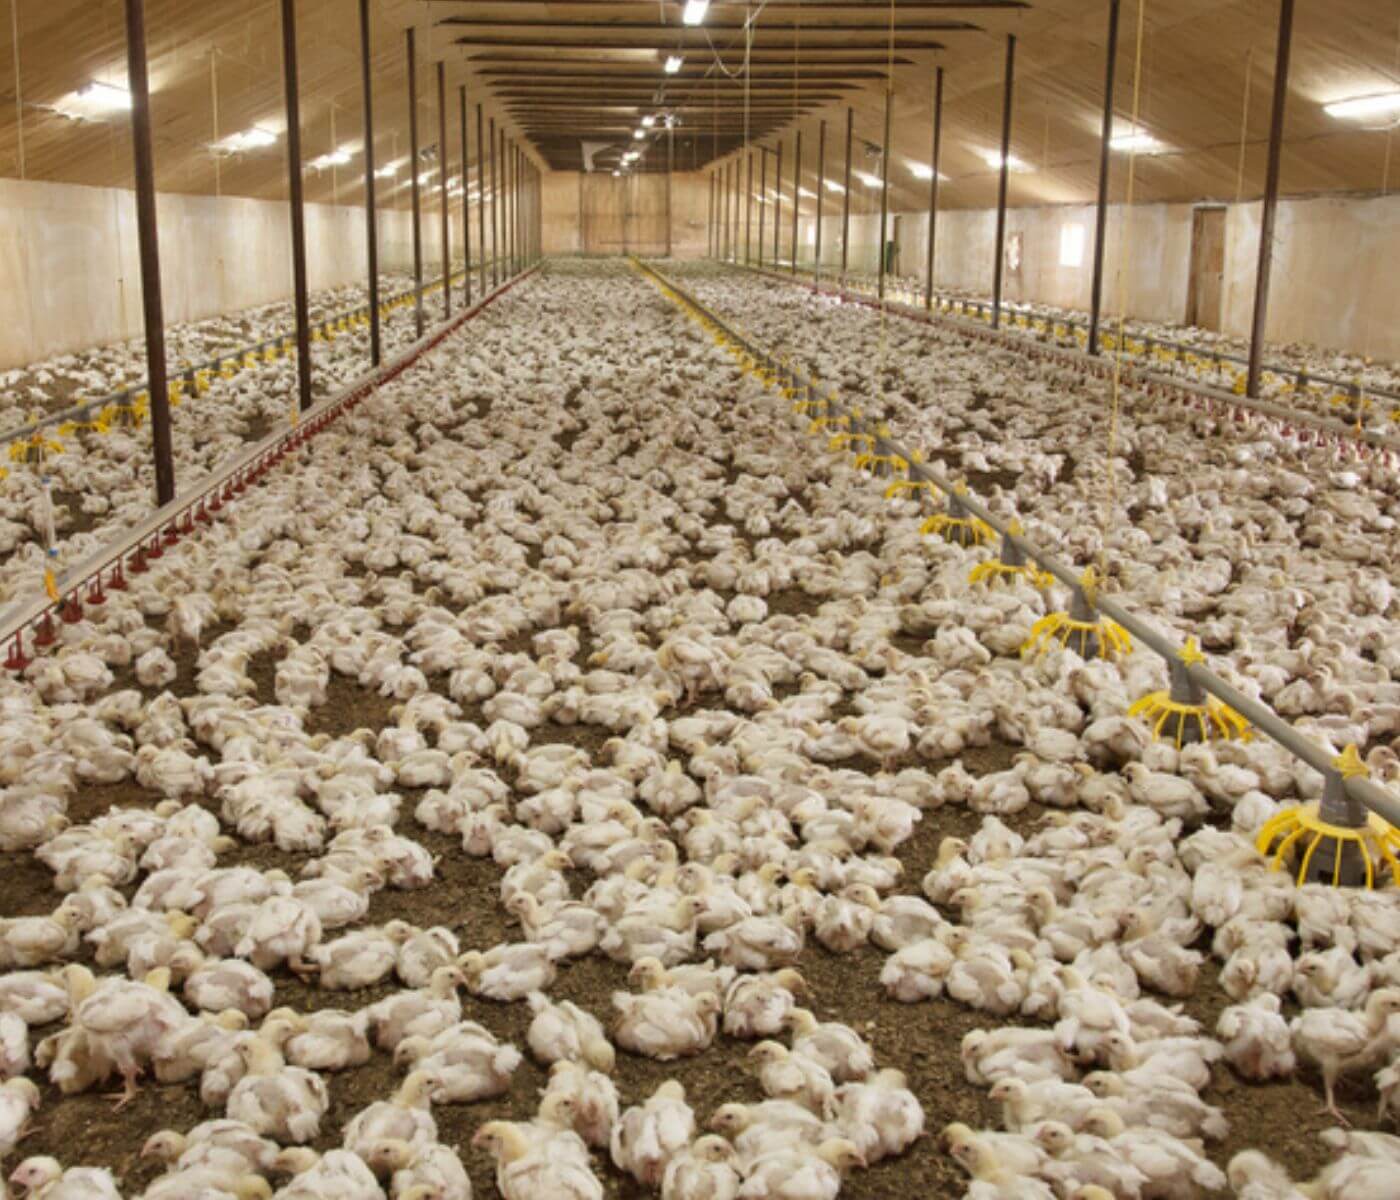 Chicken production in European Union to remain stable despite HPAI